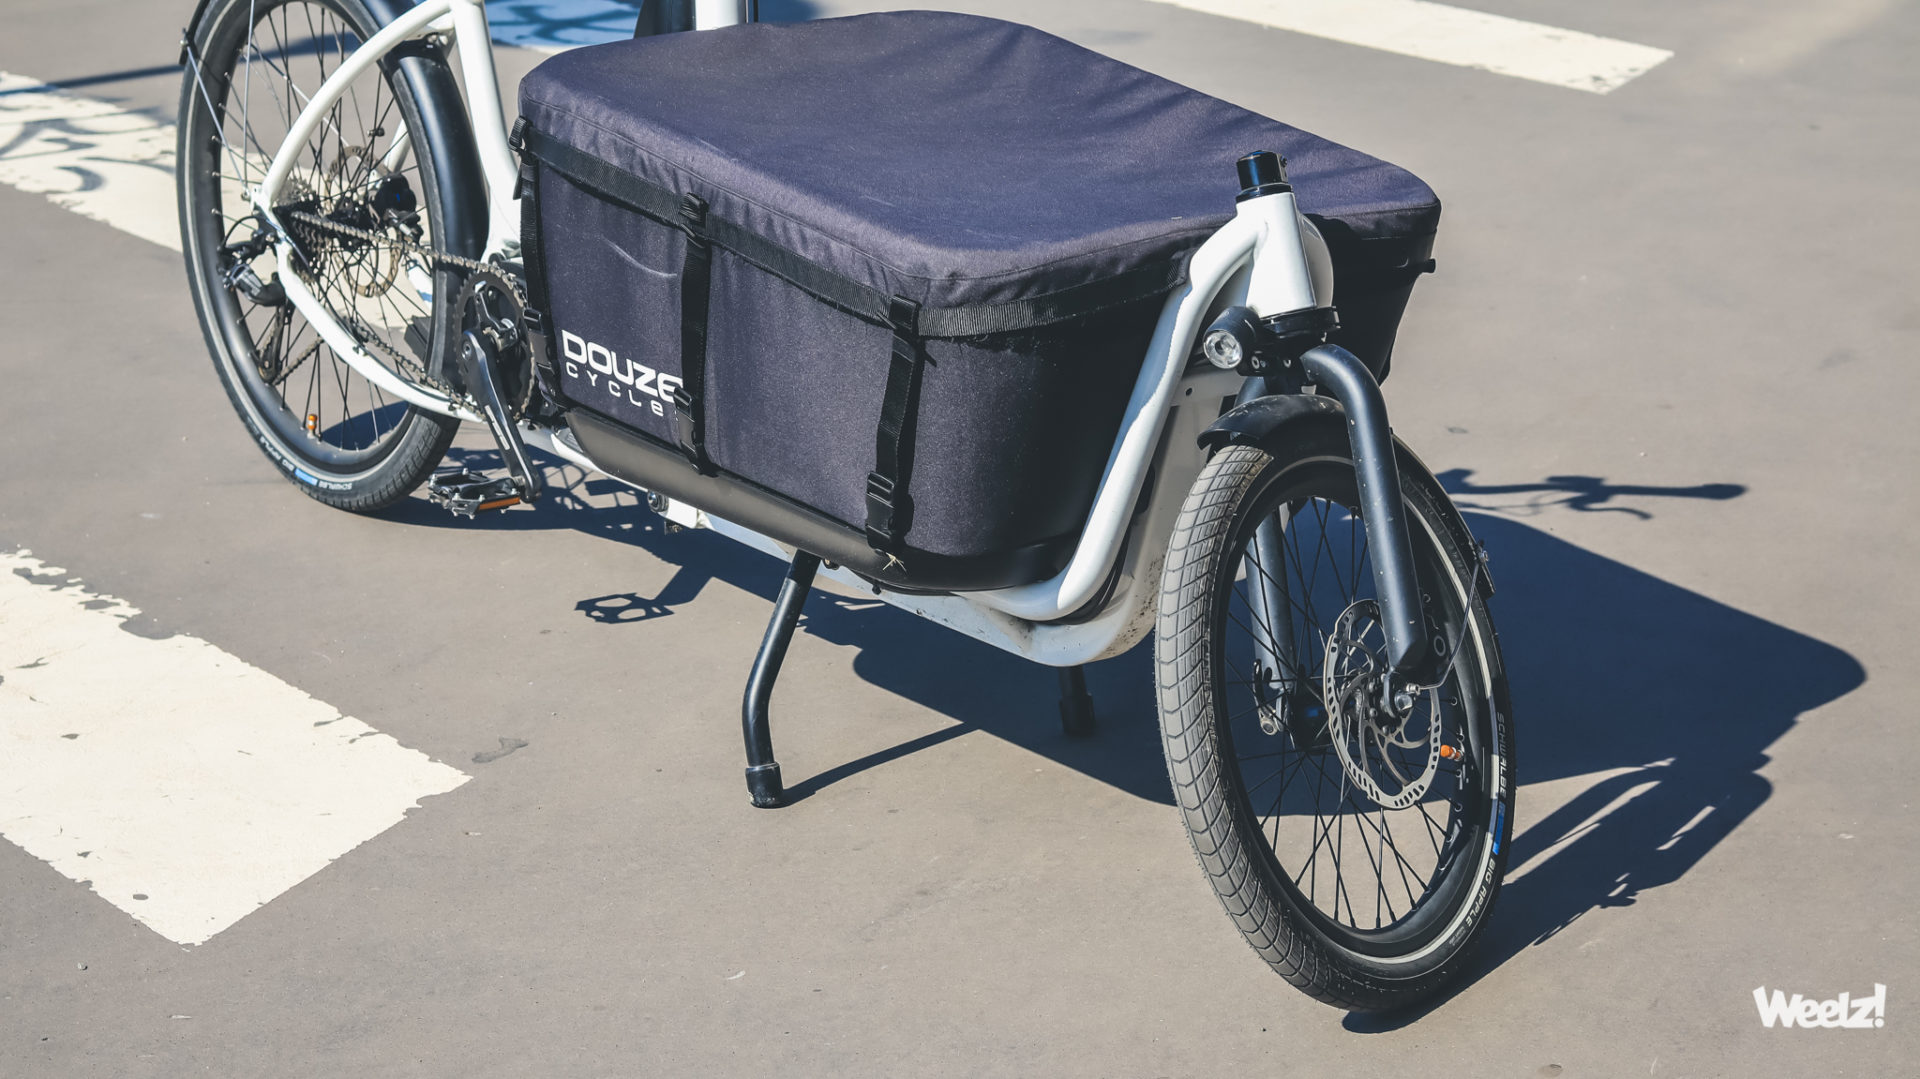 1667898667 238 Douze Cycles a key player in the cargo bike landscape